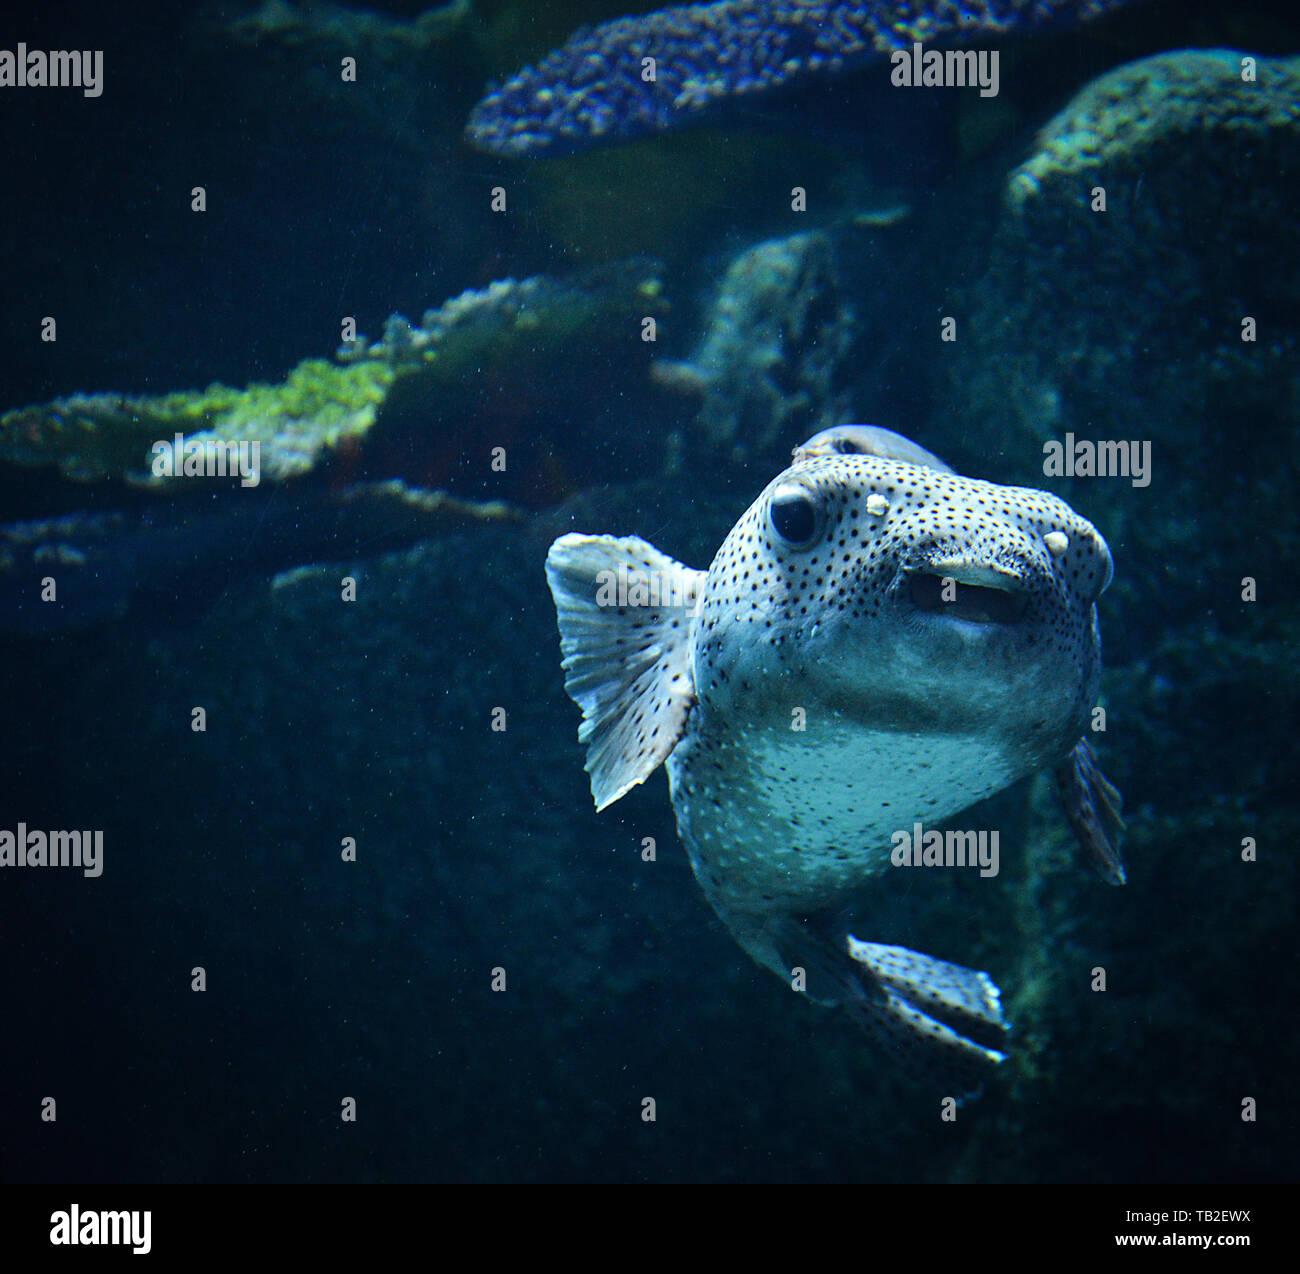 Blackspotted puffer fish swimming marine life in the ocean / Dog-faced puffer Stock Photo